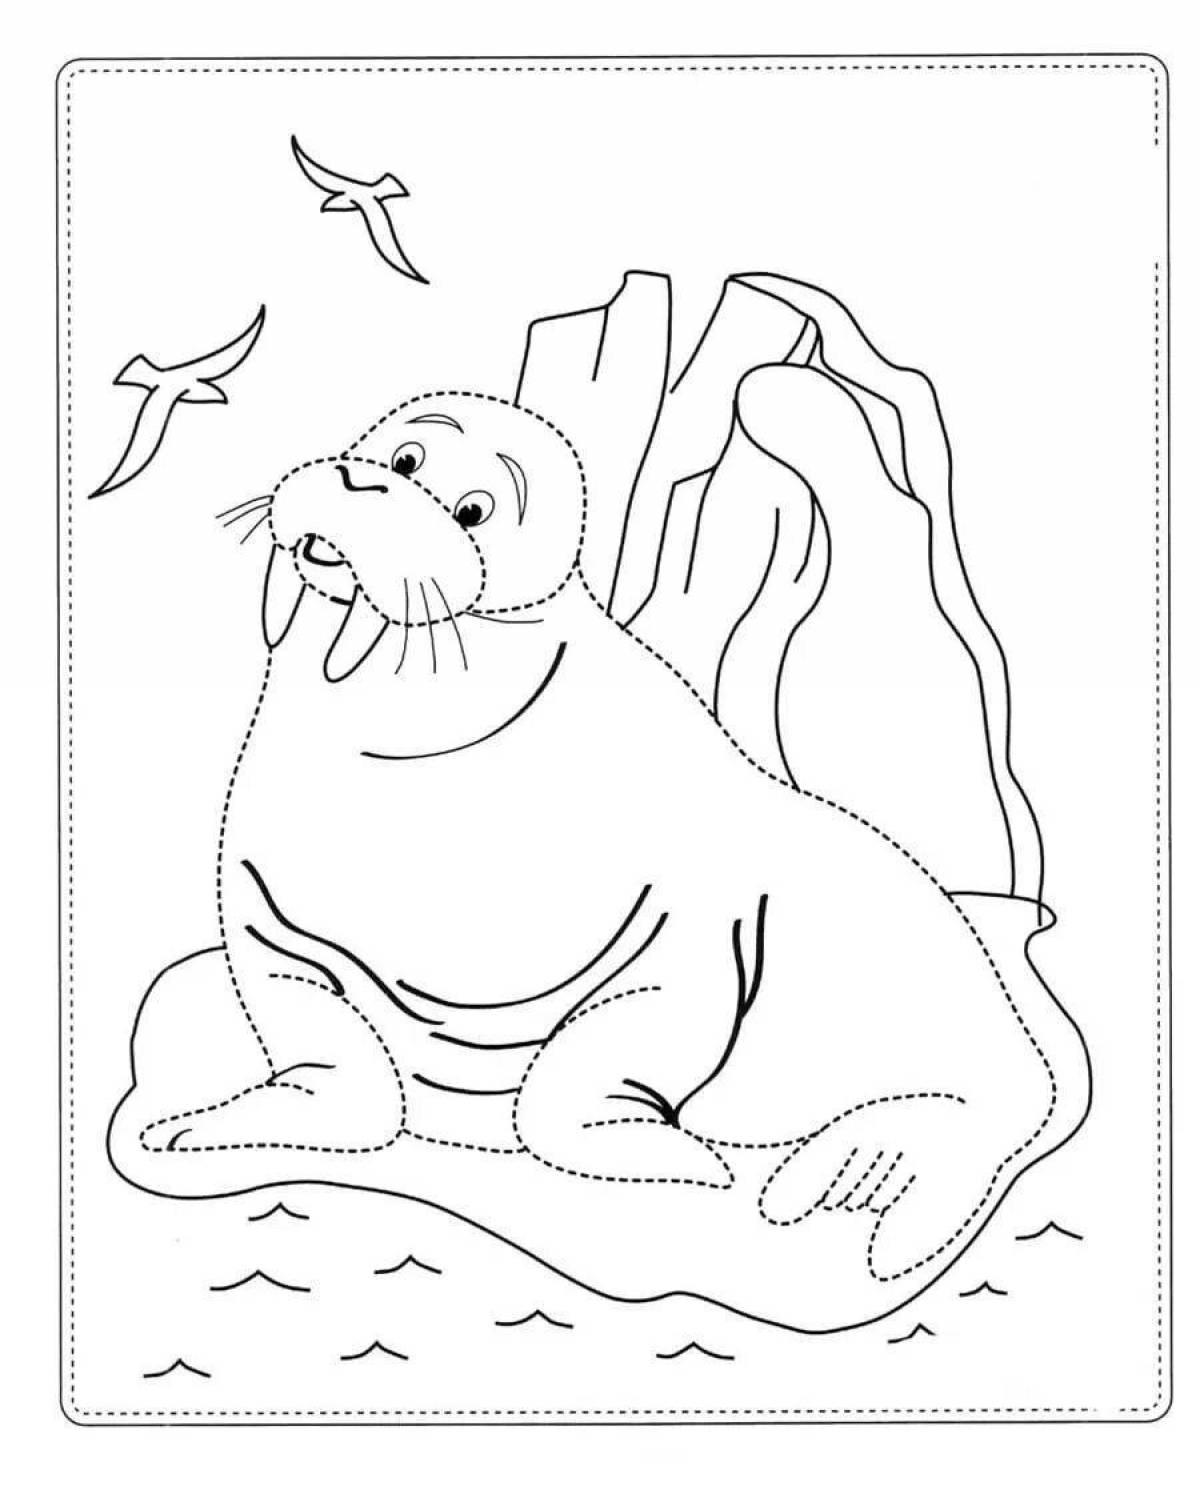 Outstanding elephant seal coloring page